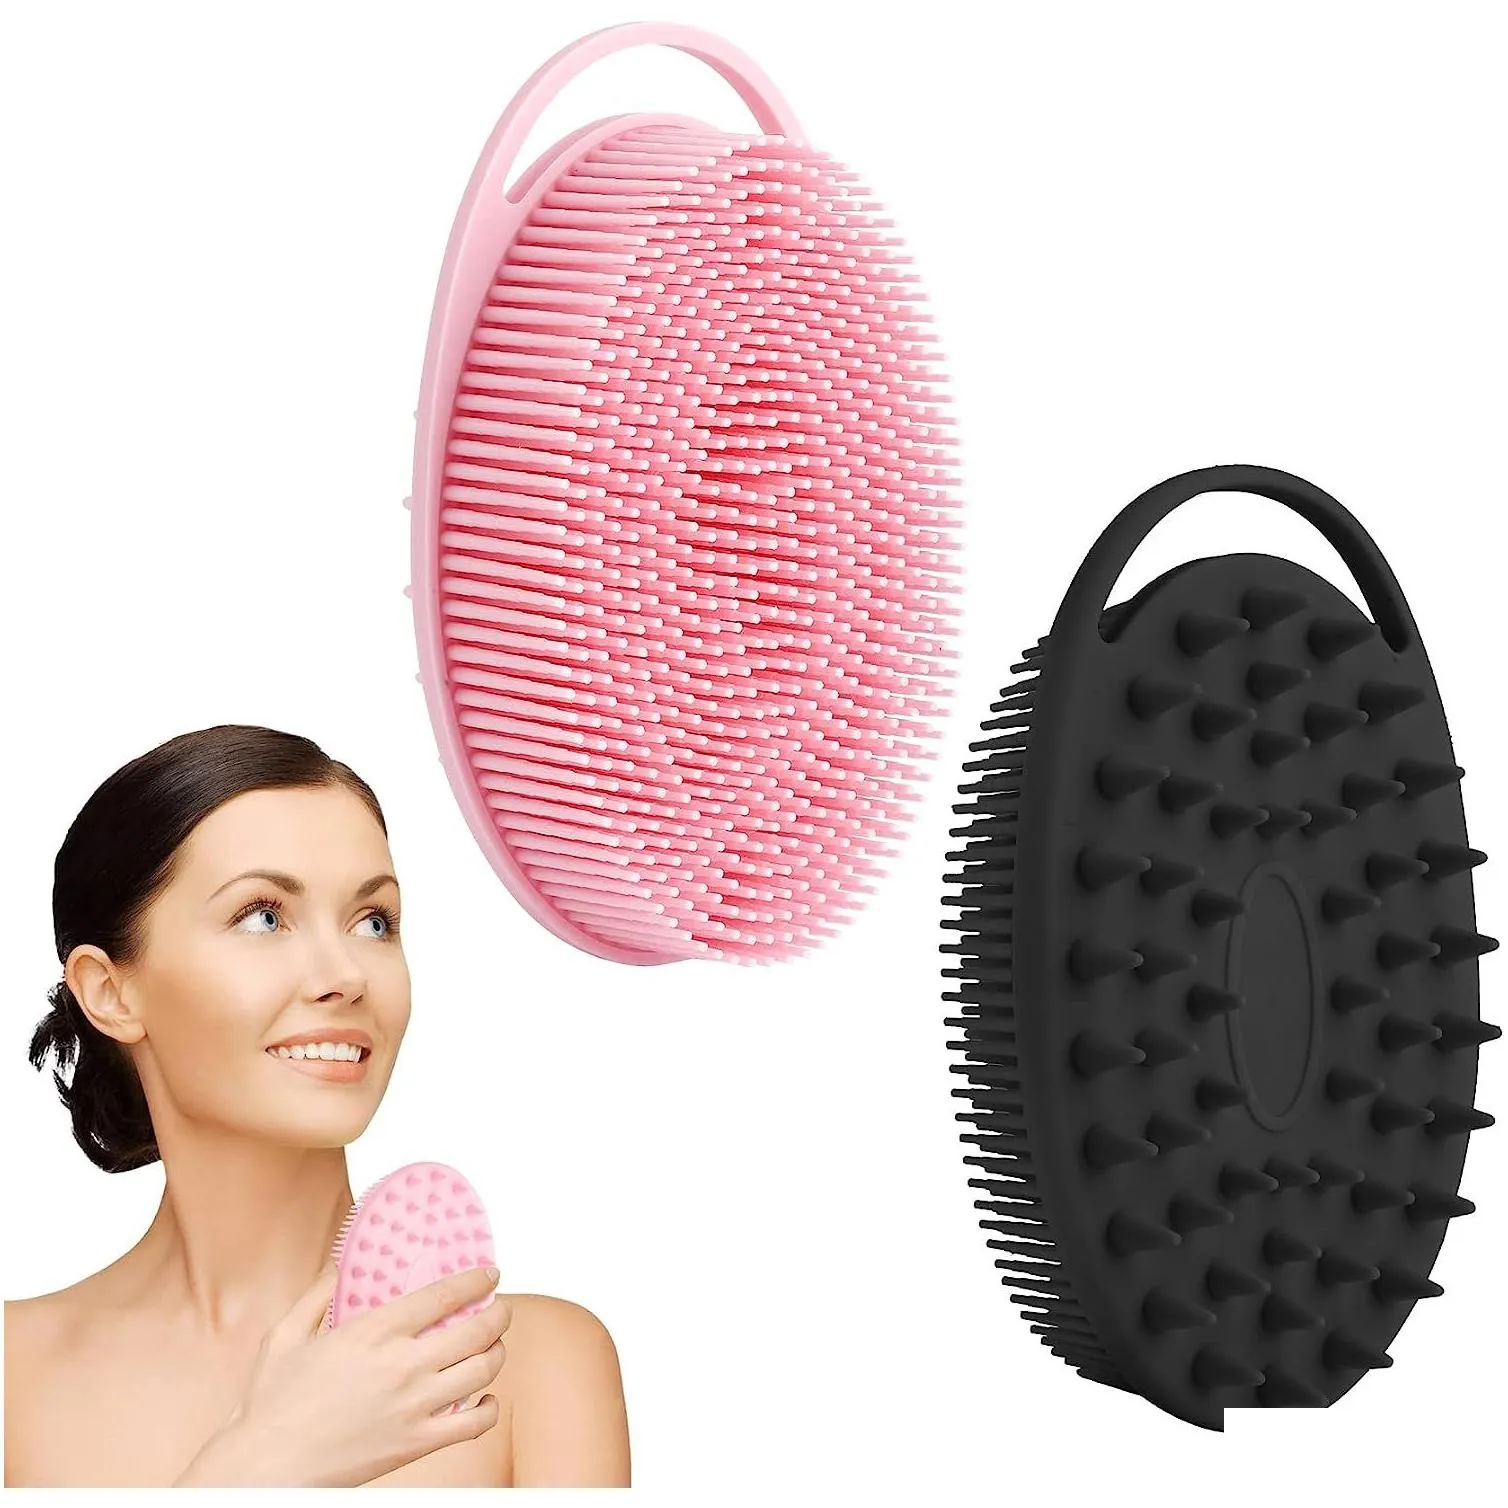 exfoliating silicone body scrubber soft silicone loofah shower 2 in 1 body exfoliator massager shampoo brush for all skin men women kid